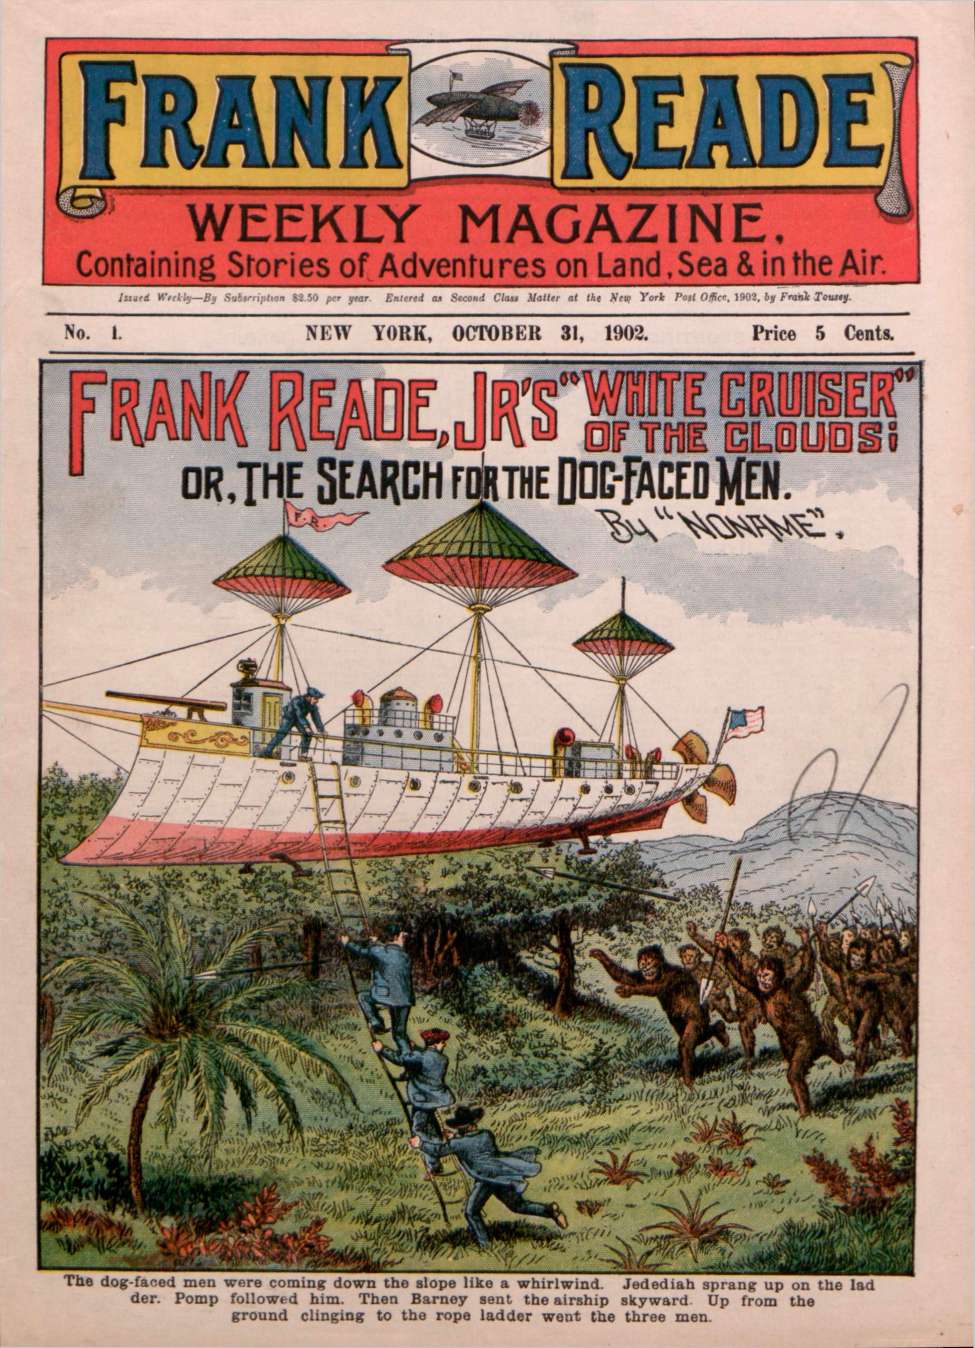 Book Cover For Frank Reade Weekly Magazine v1 1 - White Cruiser of the Clouds